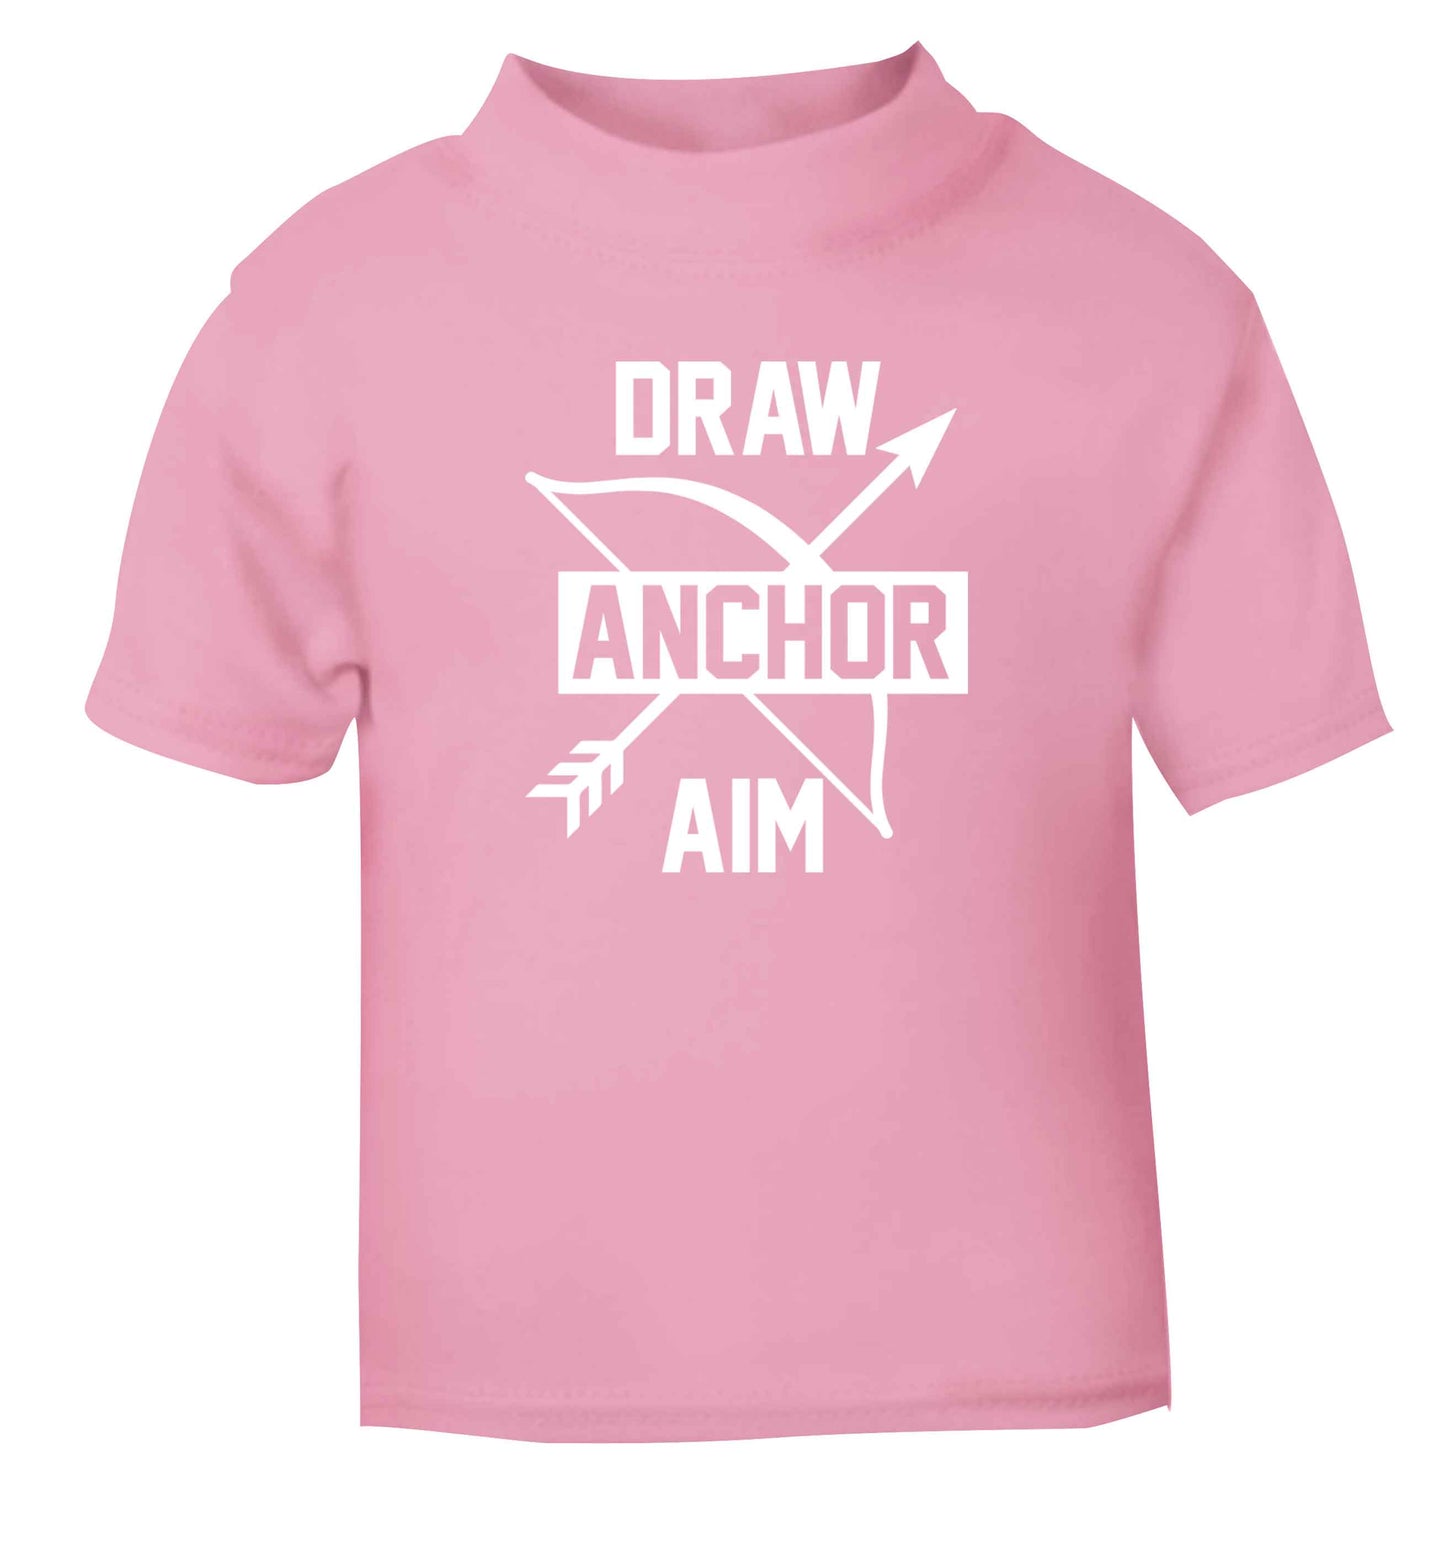 Draw anchor aim light pink Baby Toddler Tshirt 2 Years